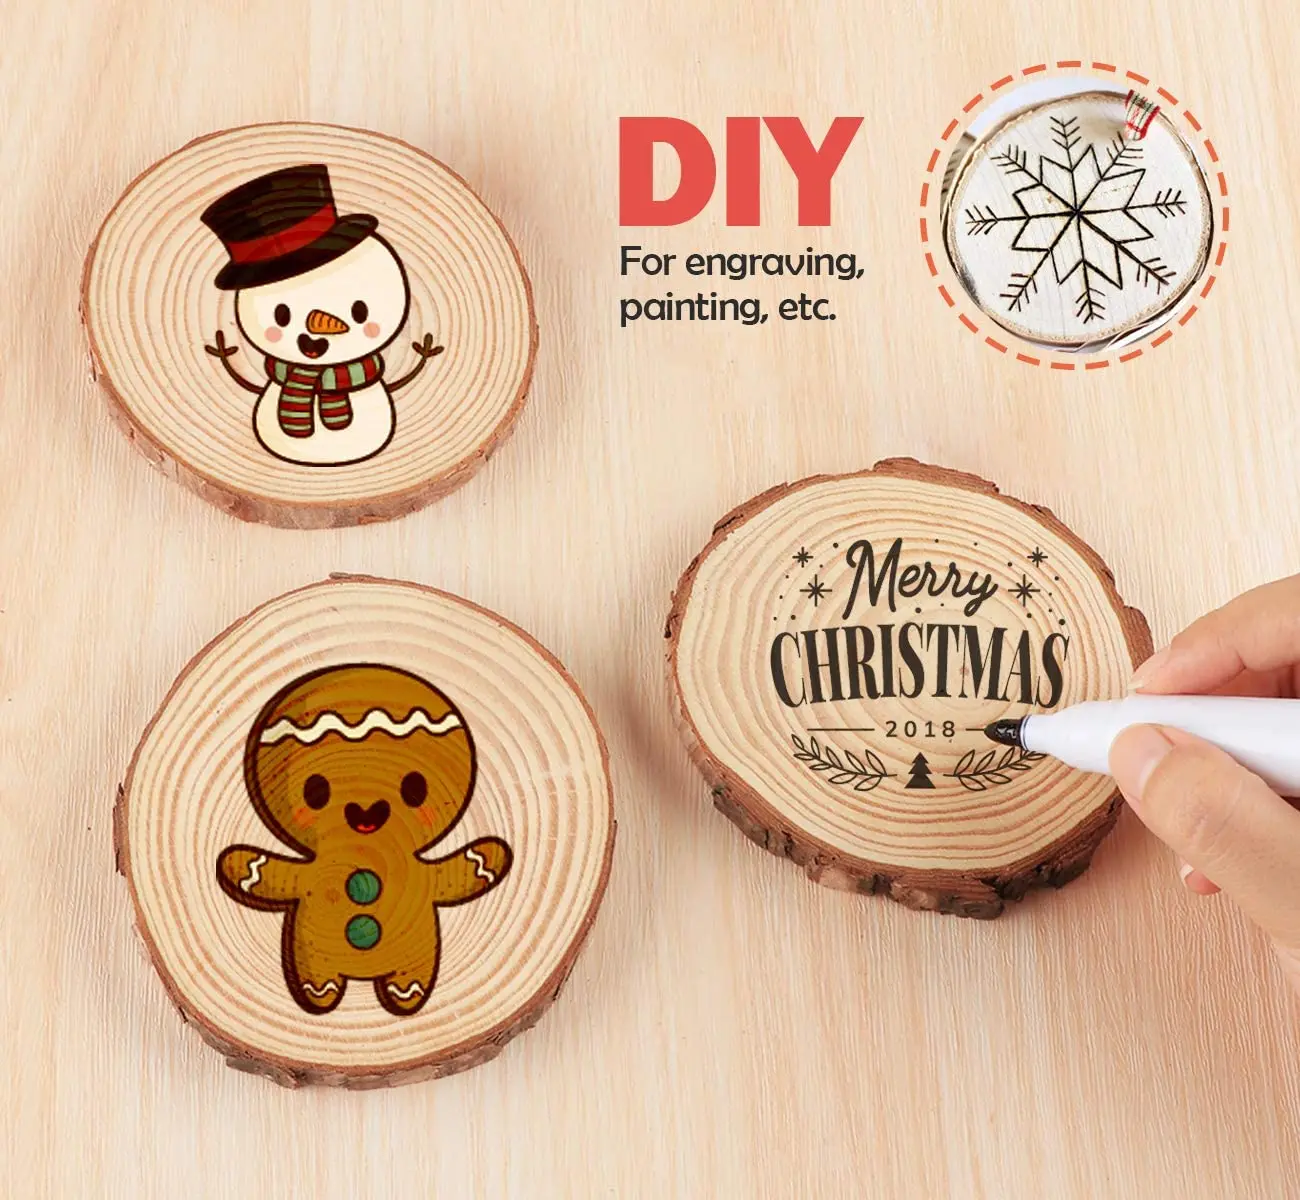 Unfinished Natural Wood Slices 12 Pcs 3.5-4 inch Craft Wood Kit Circles Crafts C